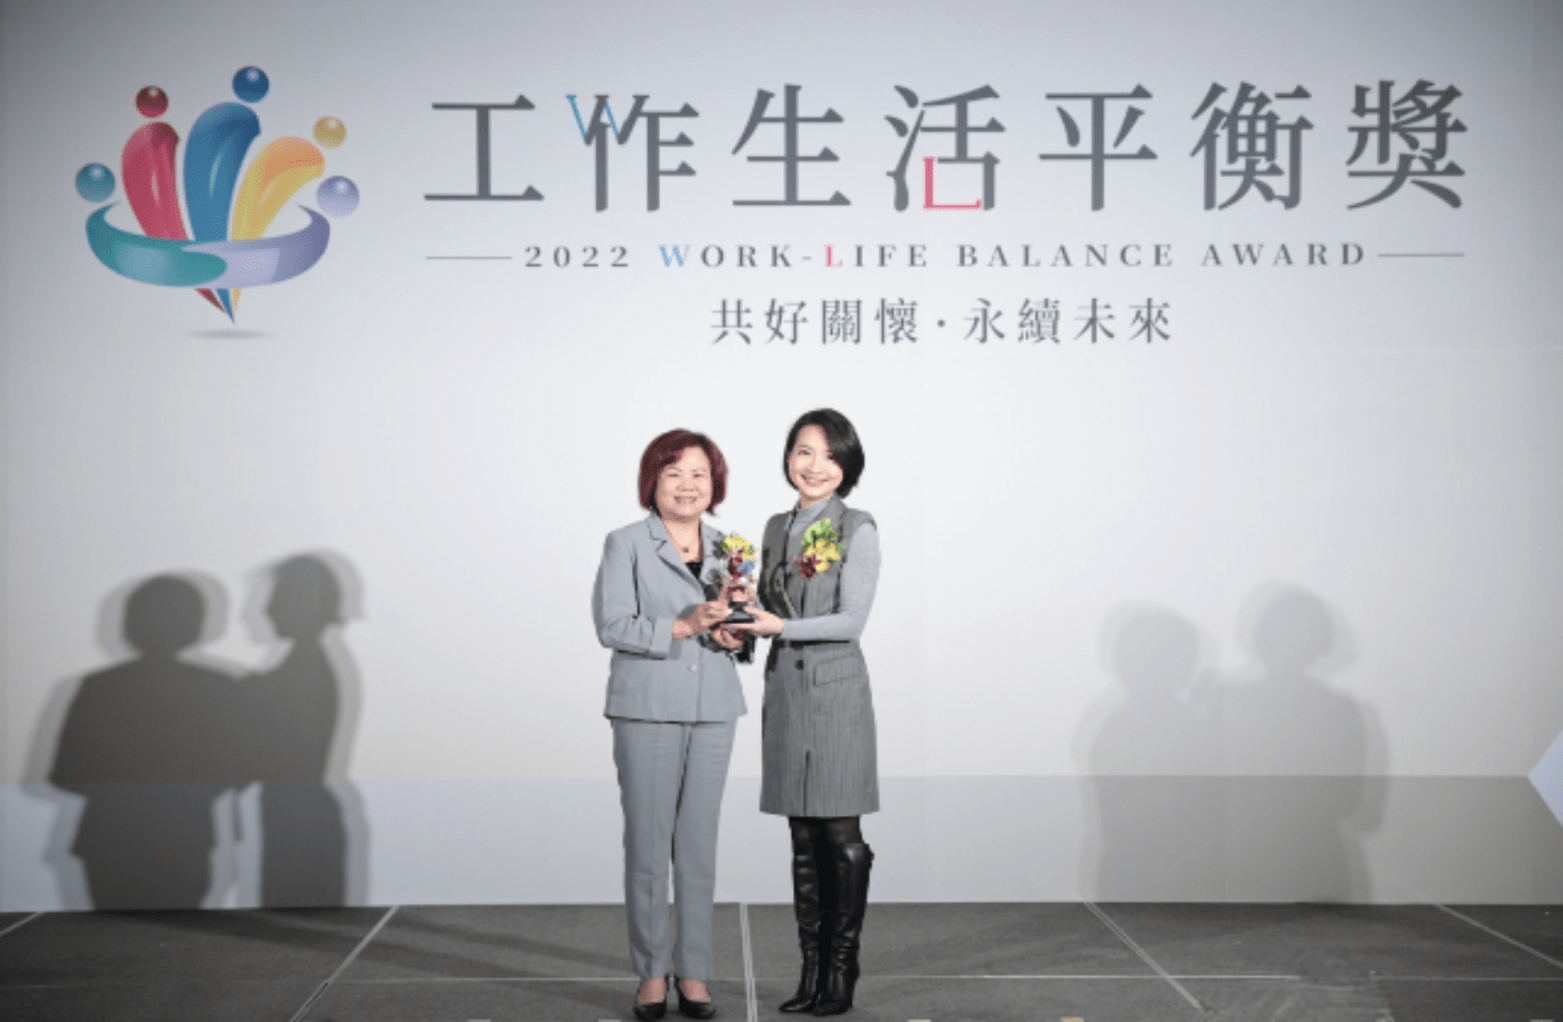 From right, Head of P&D Ørsted Taiwan, Ariel Chen, attended the Work-Life Balance Award ceremony of the Ministry of Labor, receiving the recognition of Ørsted’s effort to build an “Arbejdsglæde” workplace from Minister Ming-Chun Hsu.